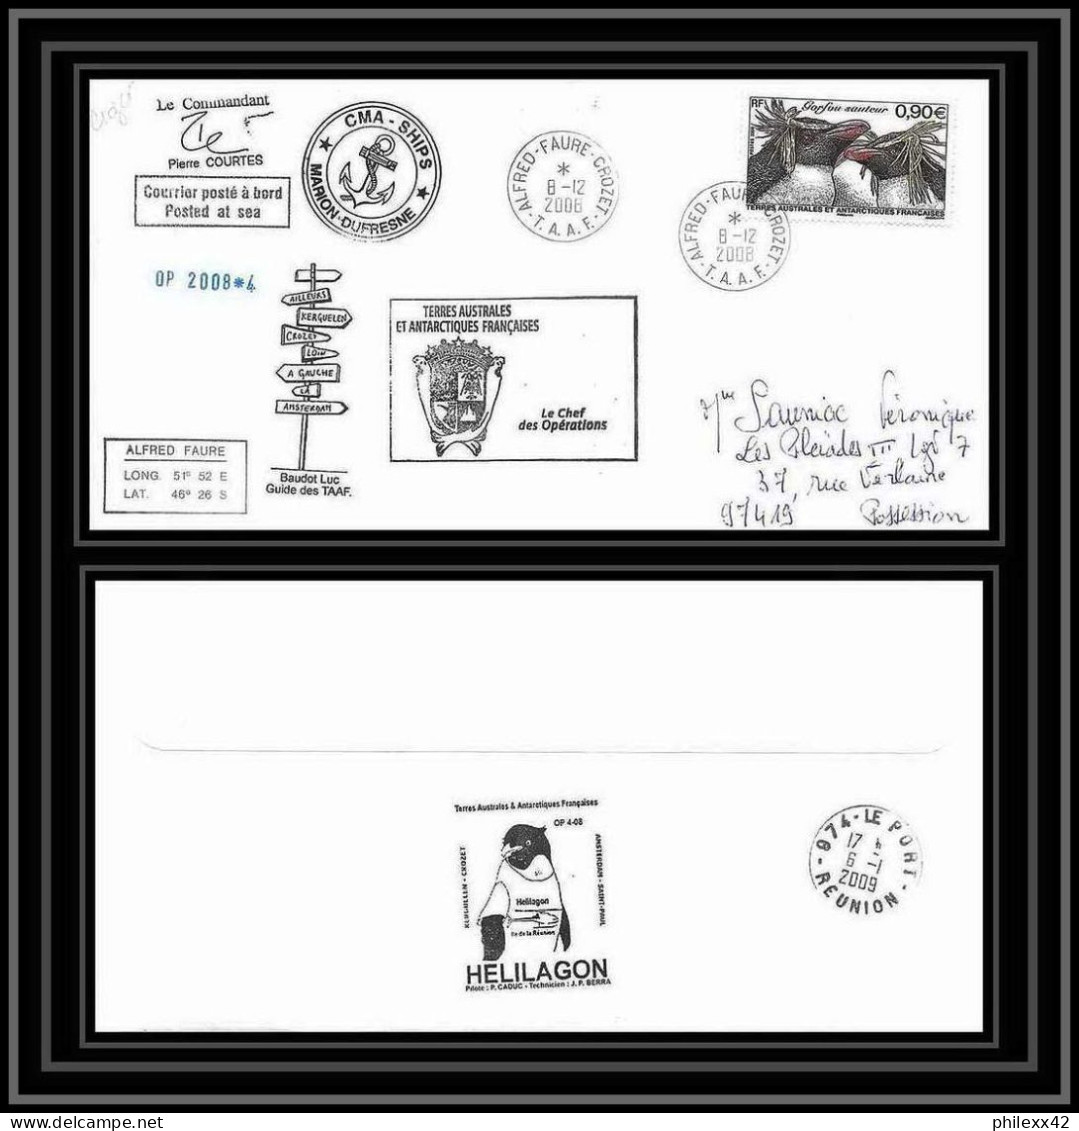 2862 ANTARCTIC Terres Australes TAAF Helilagon Lettre Cover Dufresne Signé Signed Op 2008/4 Crozet 8/12/2008 N°502 - Helicopters